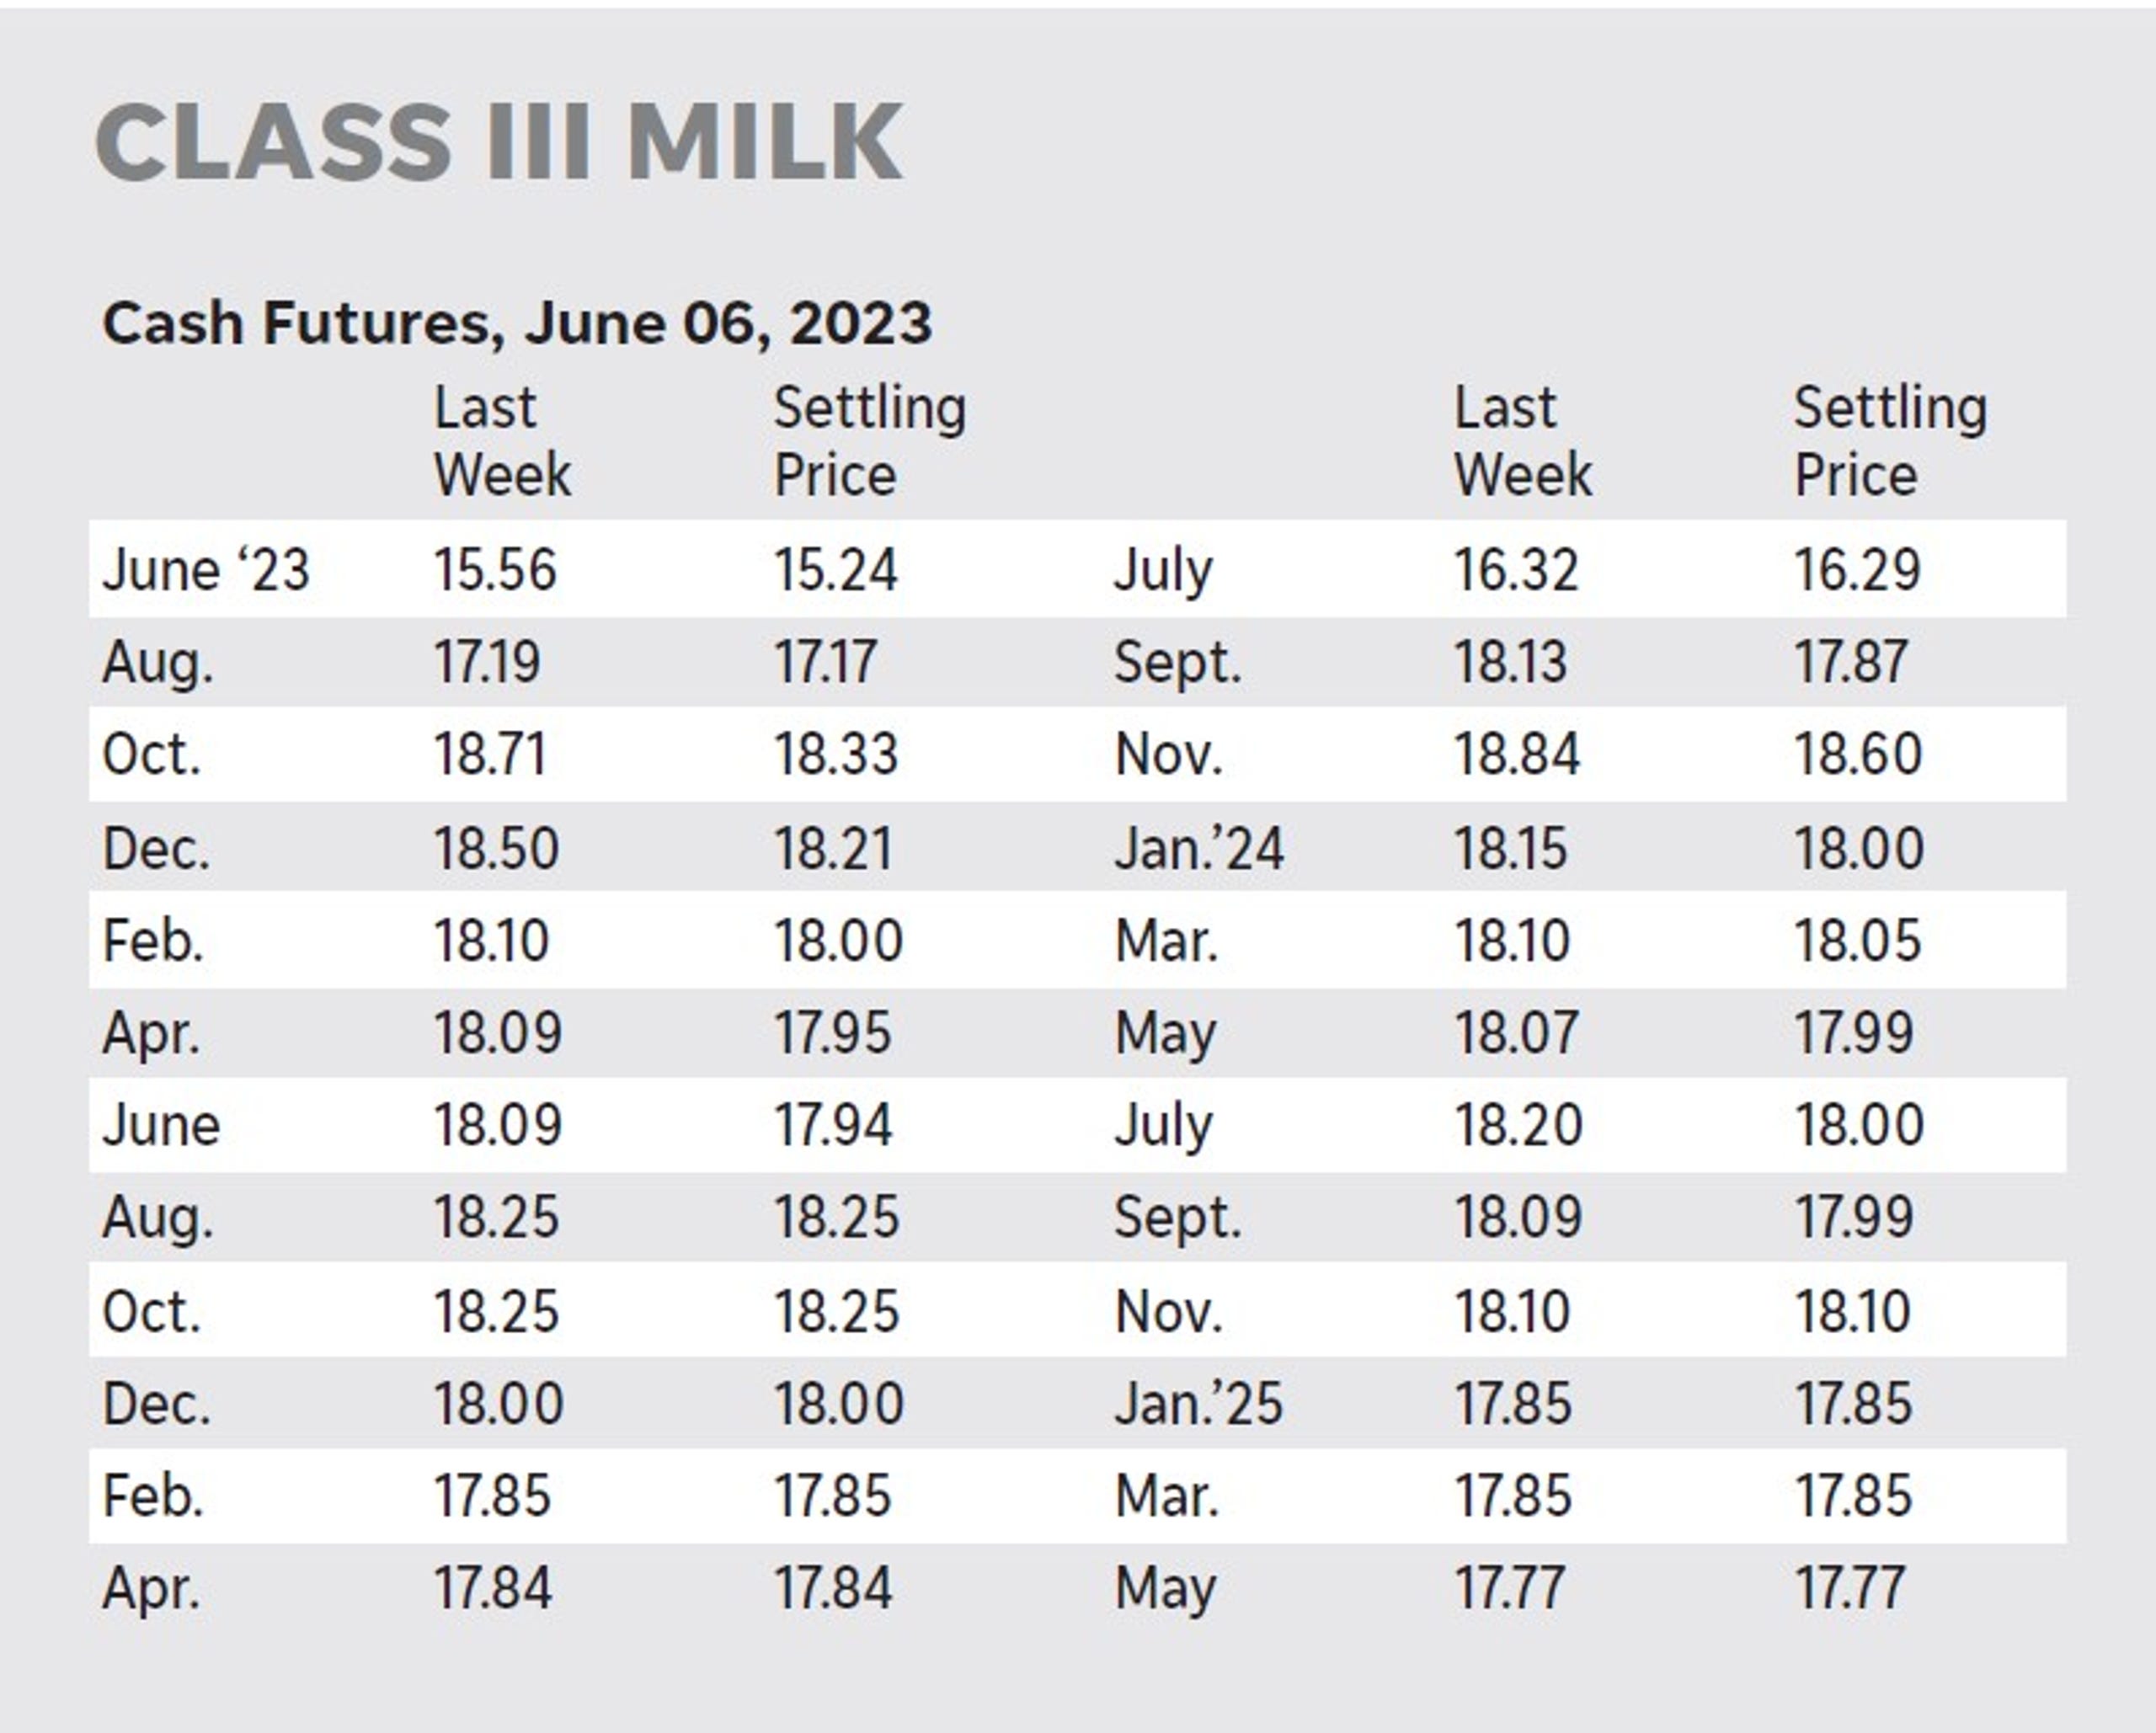 Cash futures prices for Class III milk for the week beginning June 6, 2023.